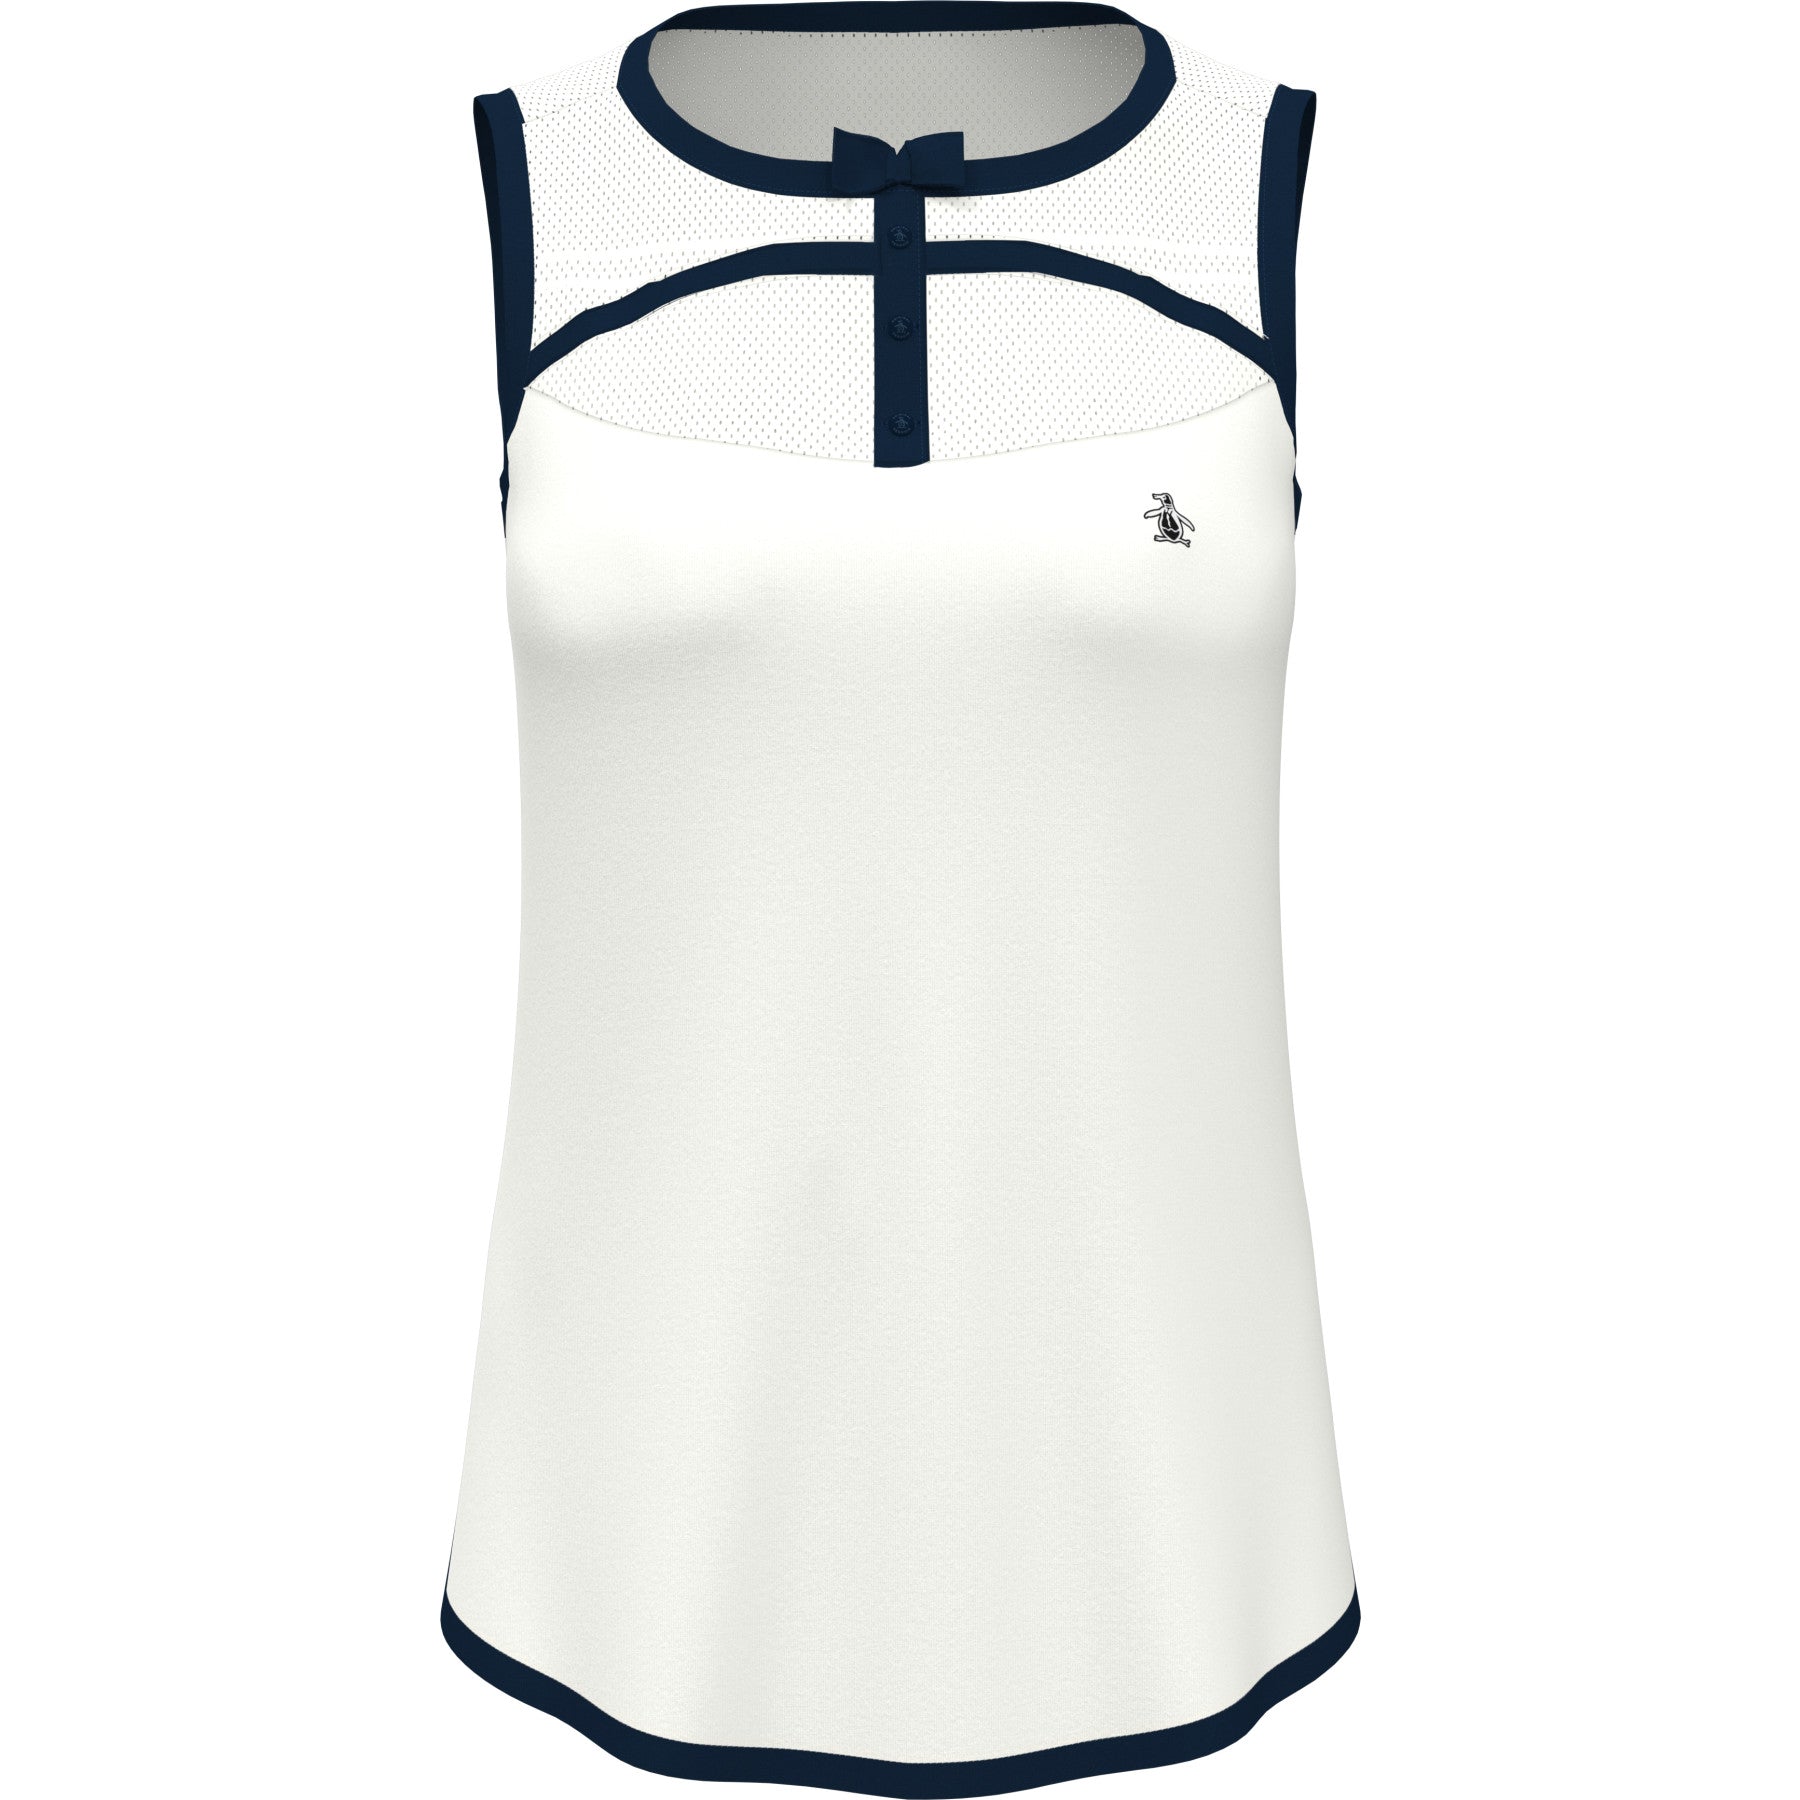 View Womens Contrast Binding Bow Golf Shirt In Bright White information